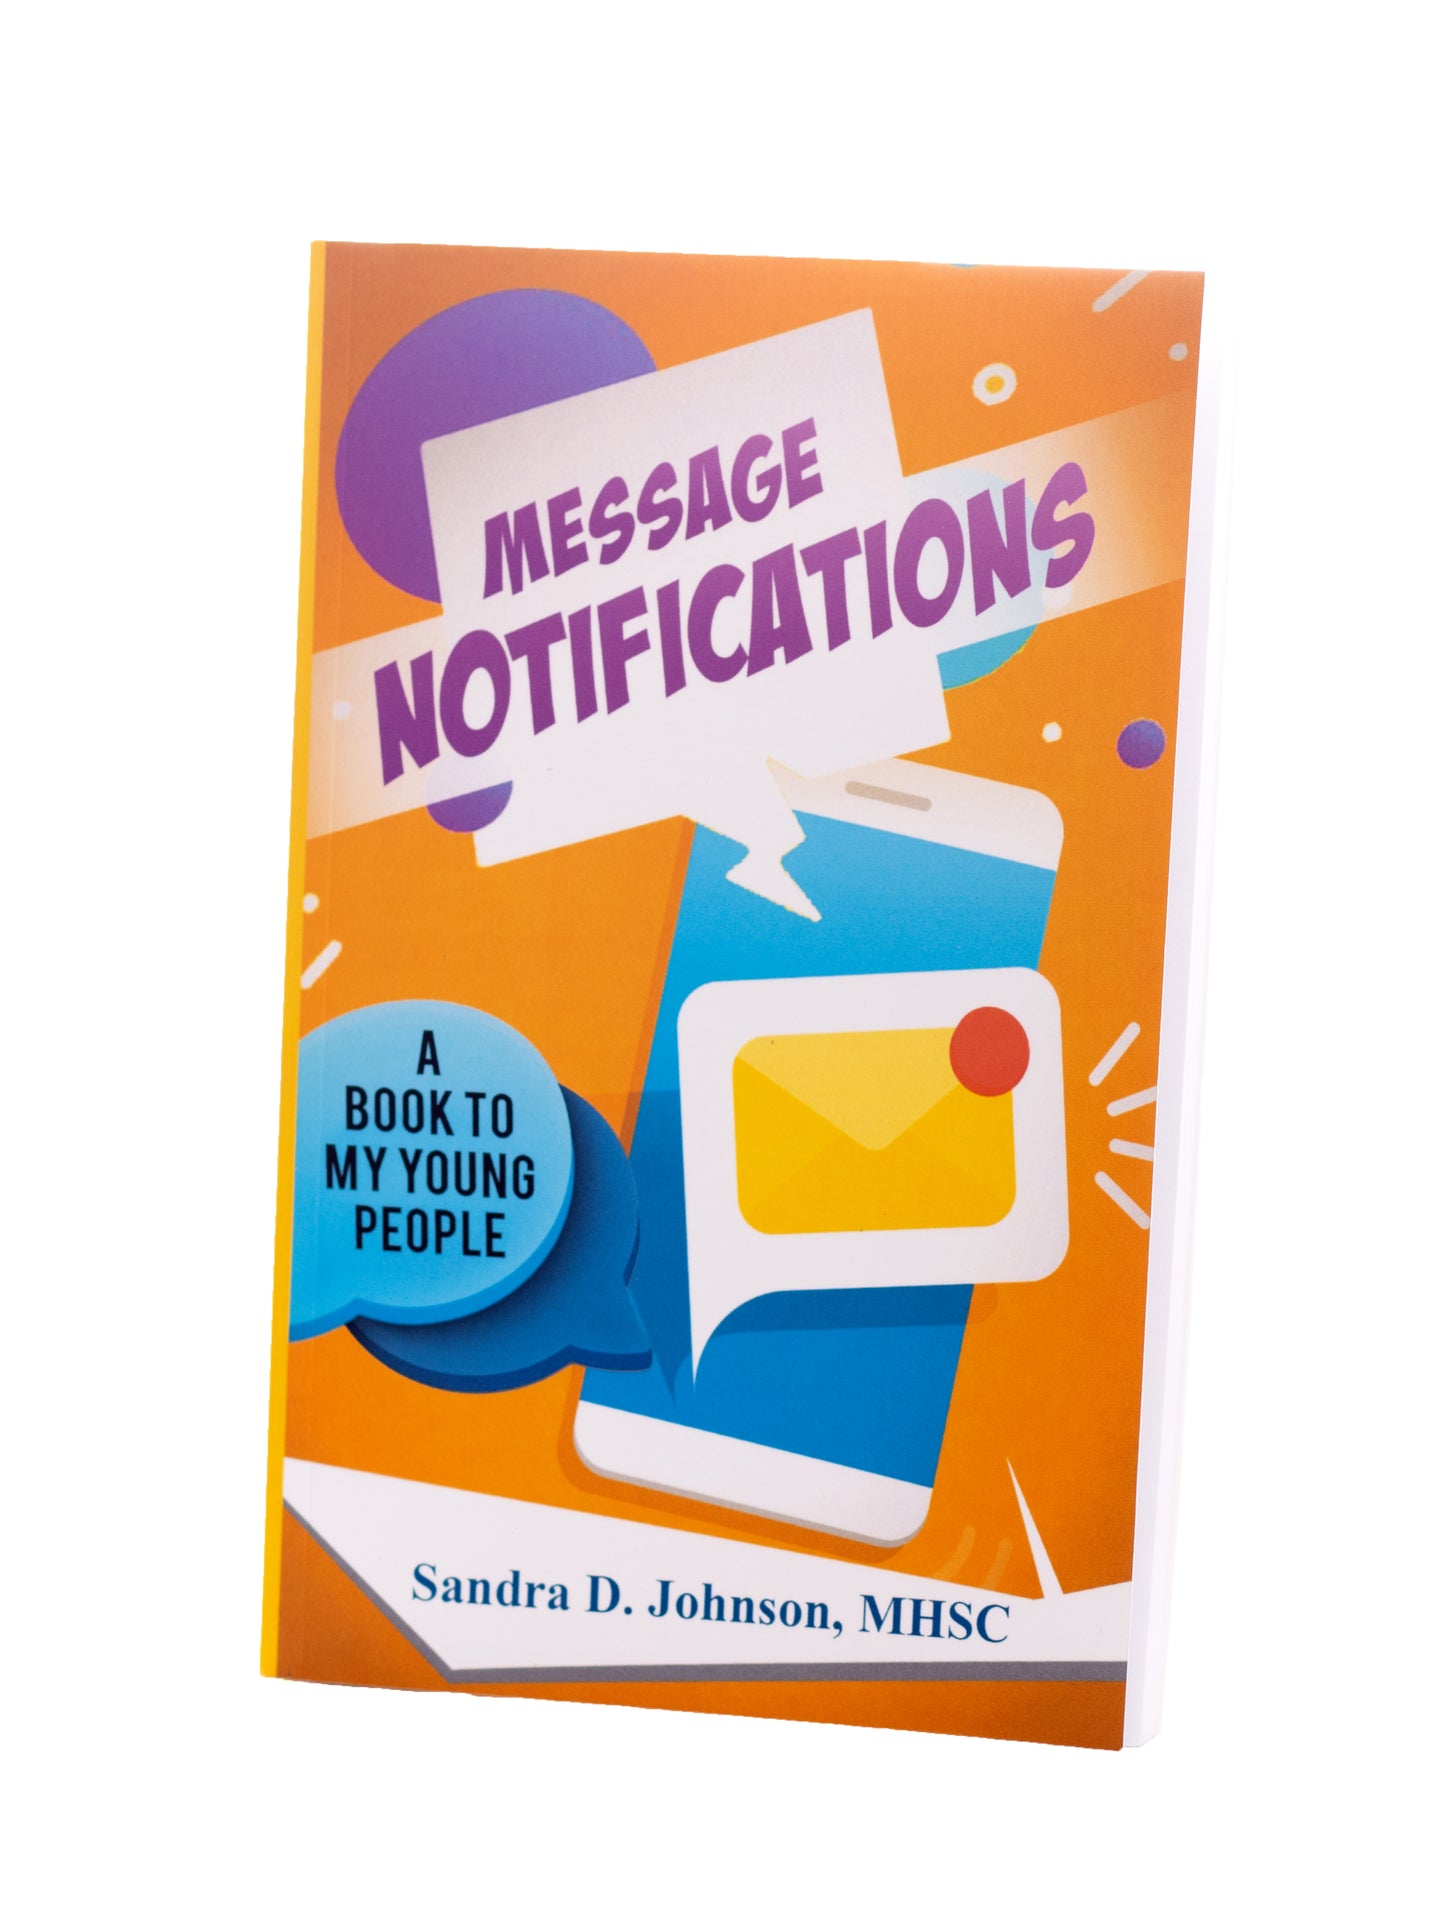 Book: Message Notifications